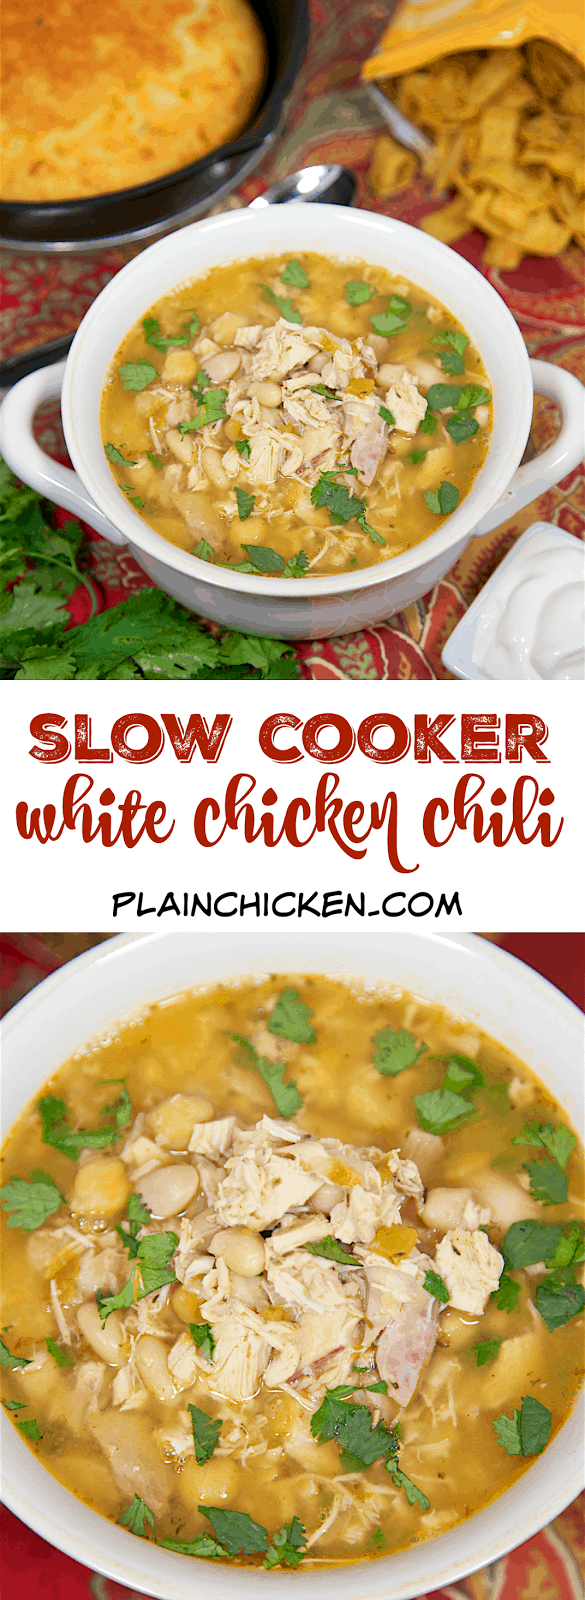 Slow Cooker White Chicken Chili recipe - chicken, seasonings, cannellini beans, chickpeas, green chilies - top with cilantro, cheese, sour cream and Fritos! SO good! Just dump everything in the slow cooker and forget it. Complete the meal with some cornbread. Quick and easy weeknight meal!